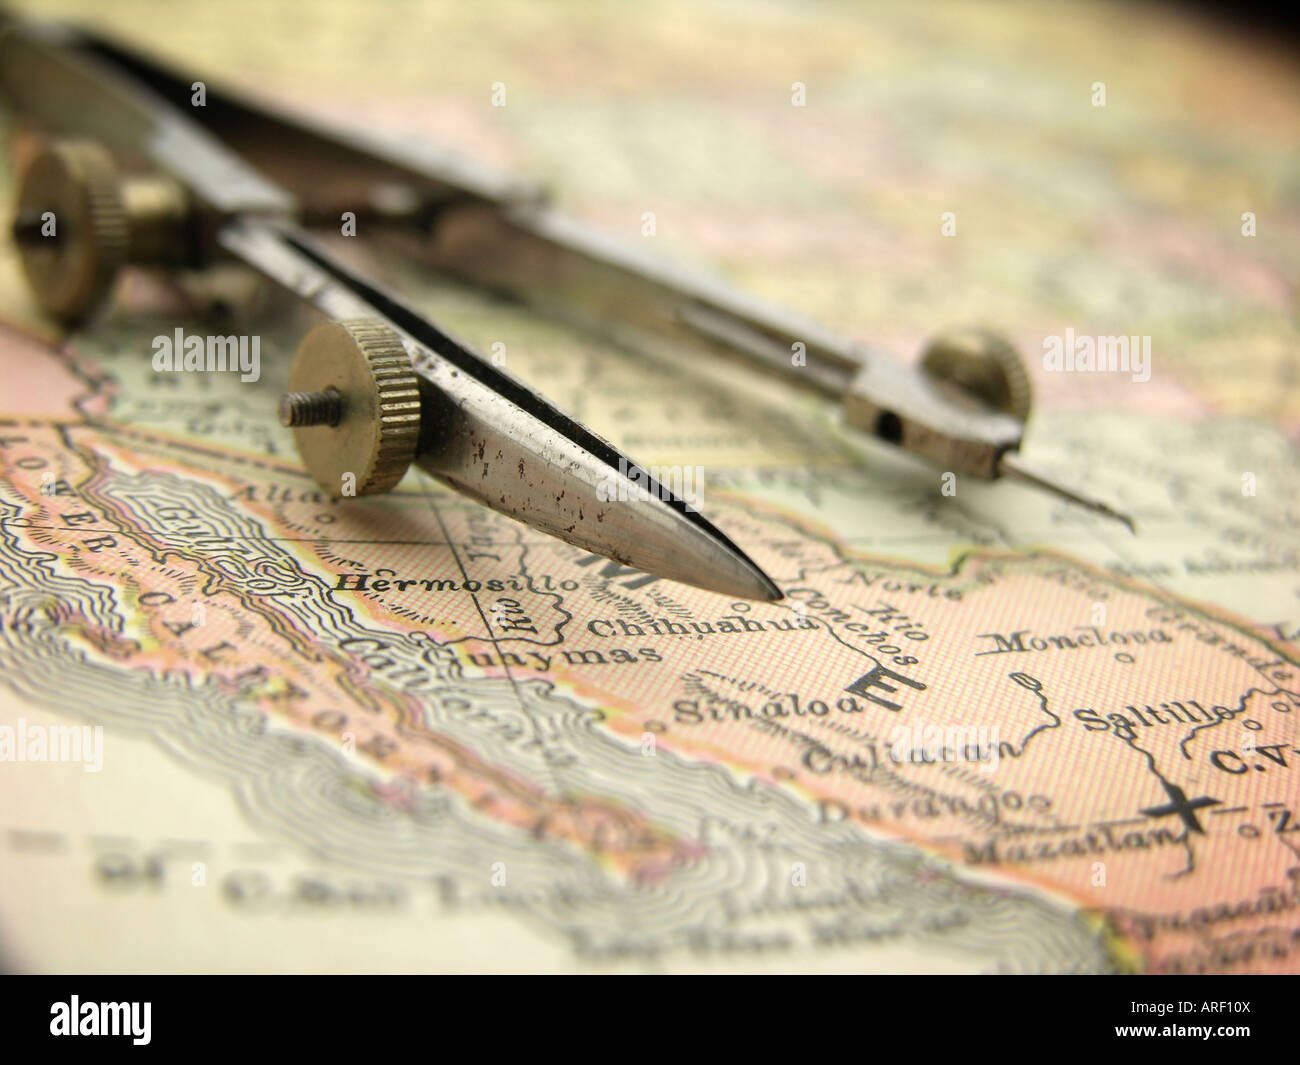 Drafting Compass on Map Stock Photo